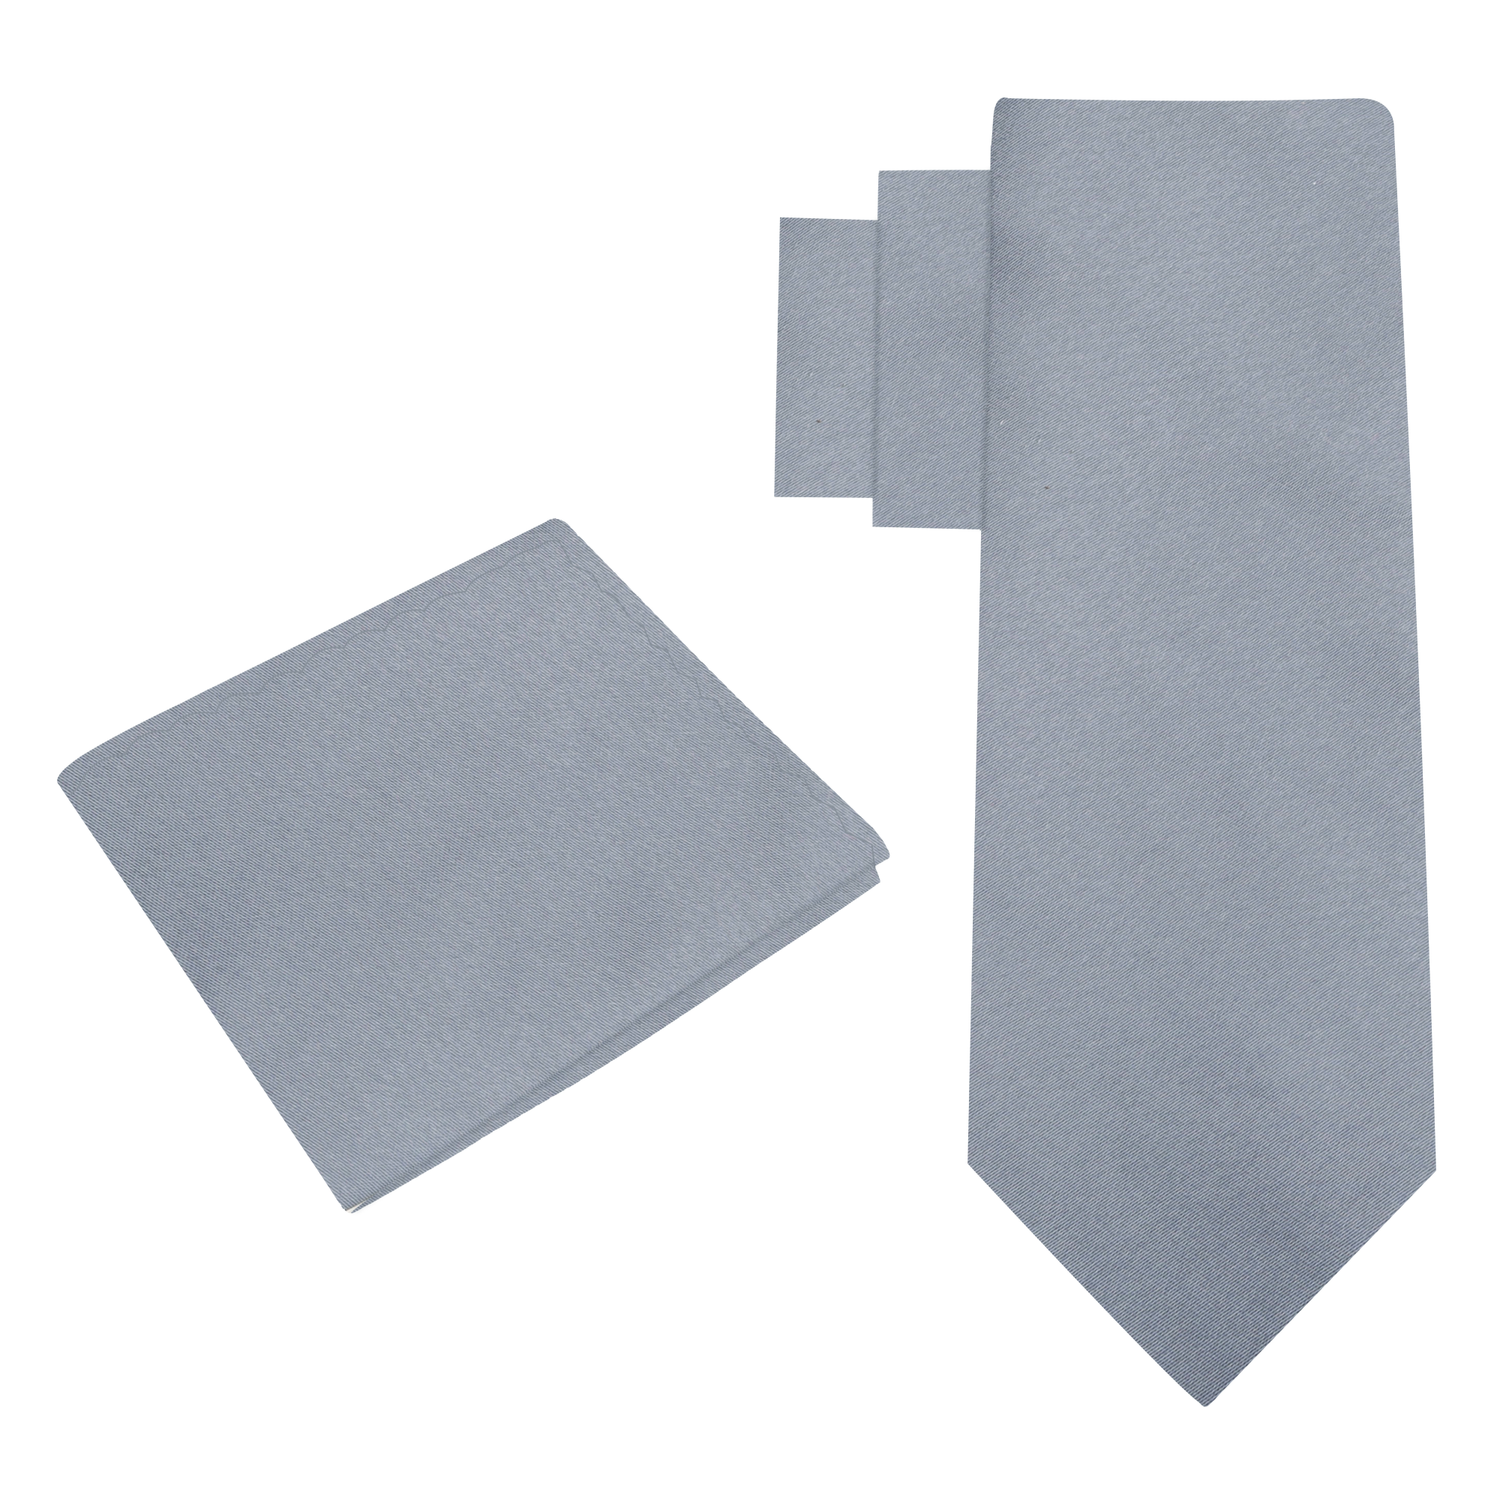 Alt: Grey Necktie and Matching Square